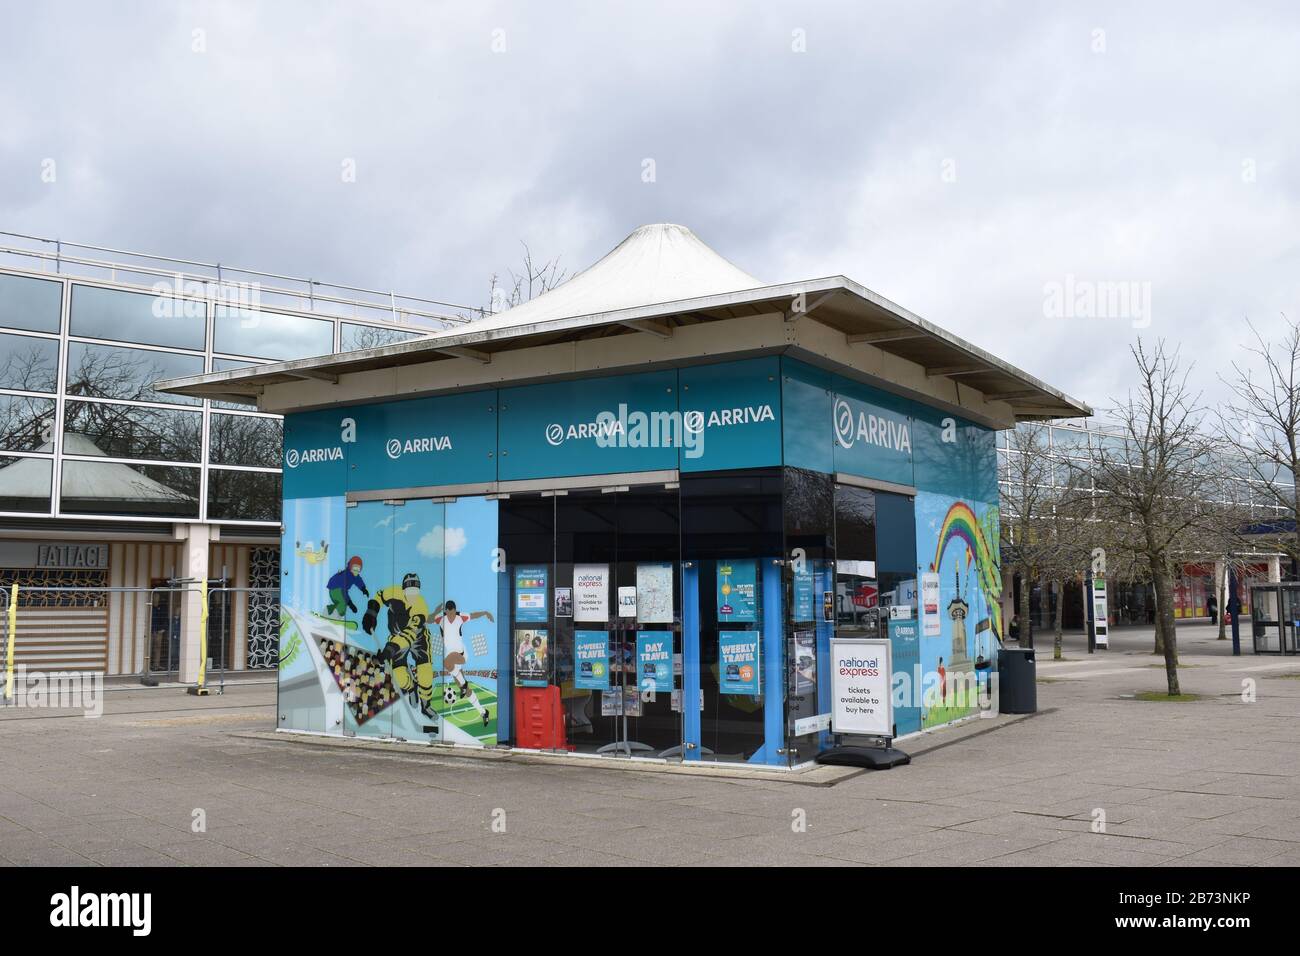 The Arriva kiosk in Central Milton Keynes.  Arriva bus services are to be reduced in line with the social distancing policy for Covid-19 (March 2020). Stock Photo